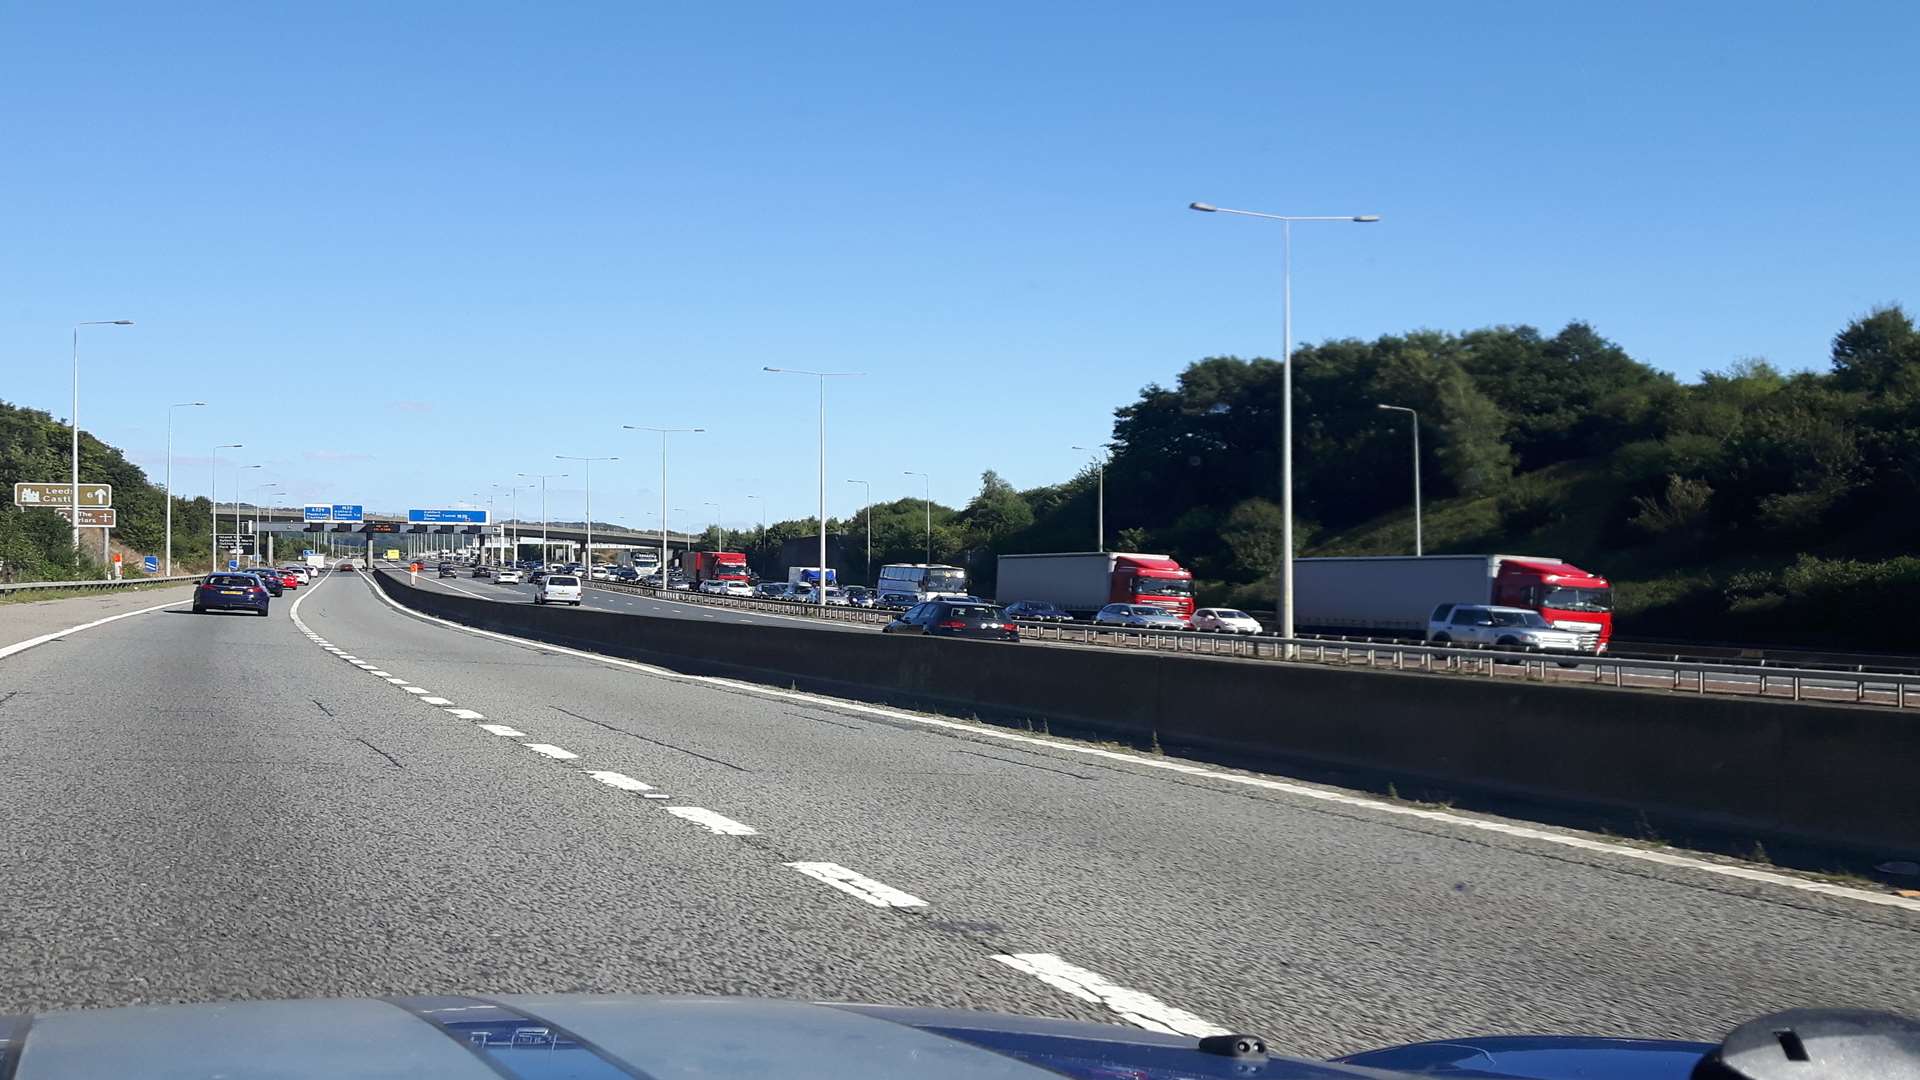 Traffic is queuing on the M20